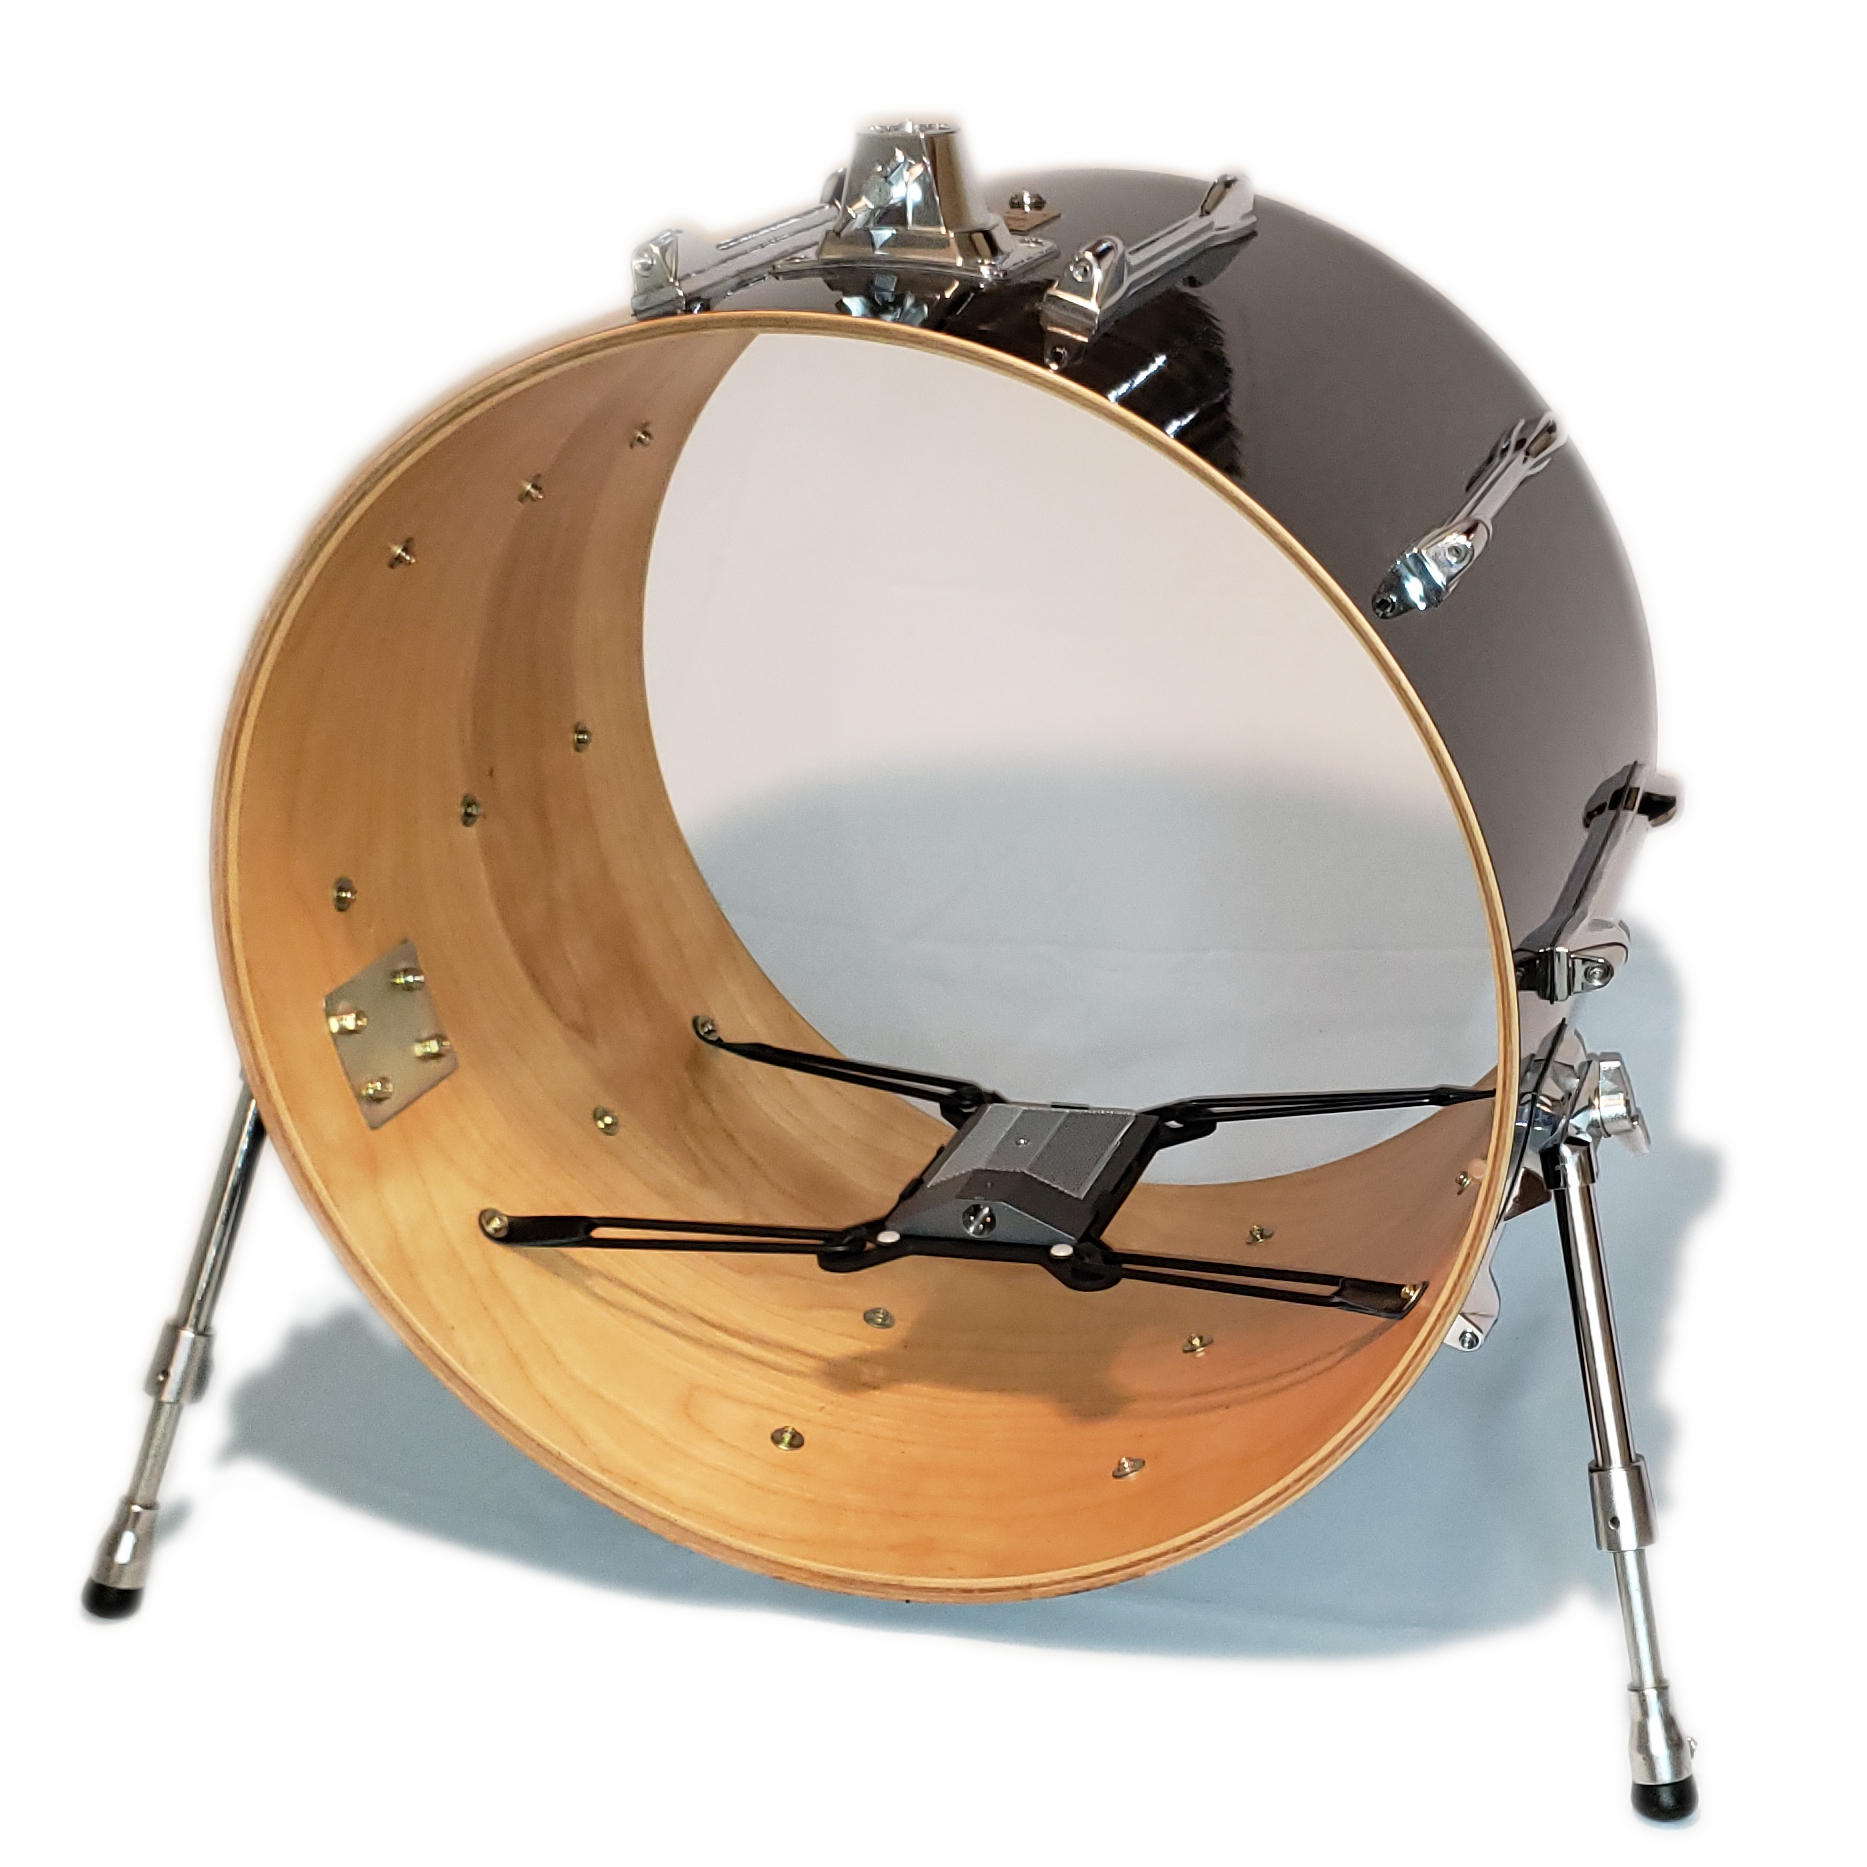 silhouet Luipaard beest Kick drum boundary microphones stay in place - The Kelly SHU FLATZ™